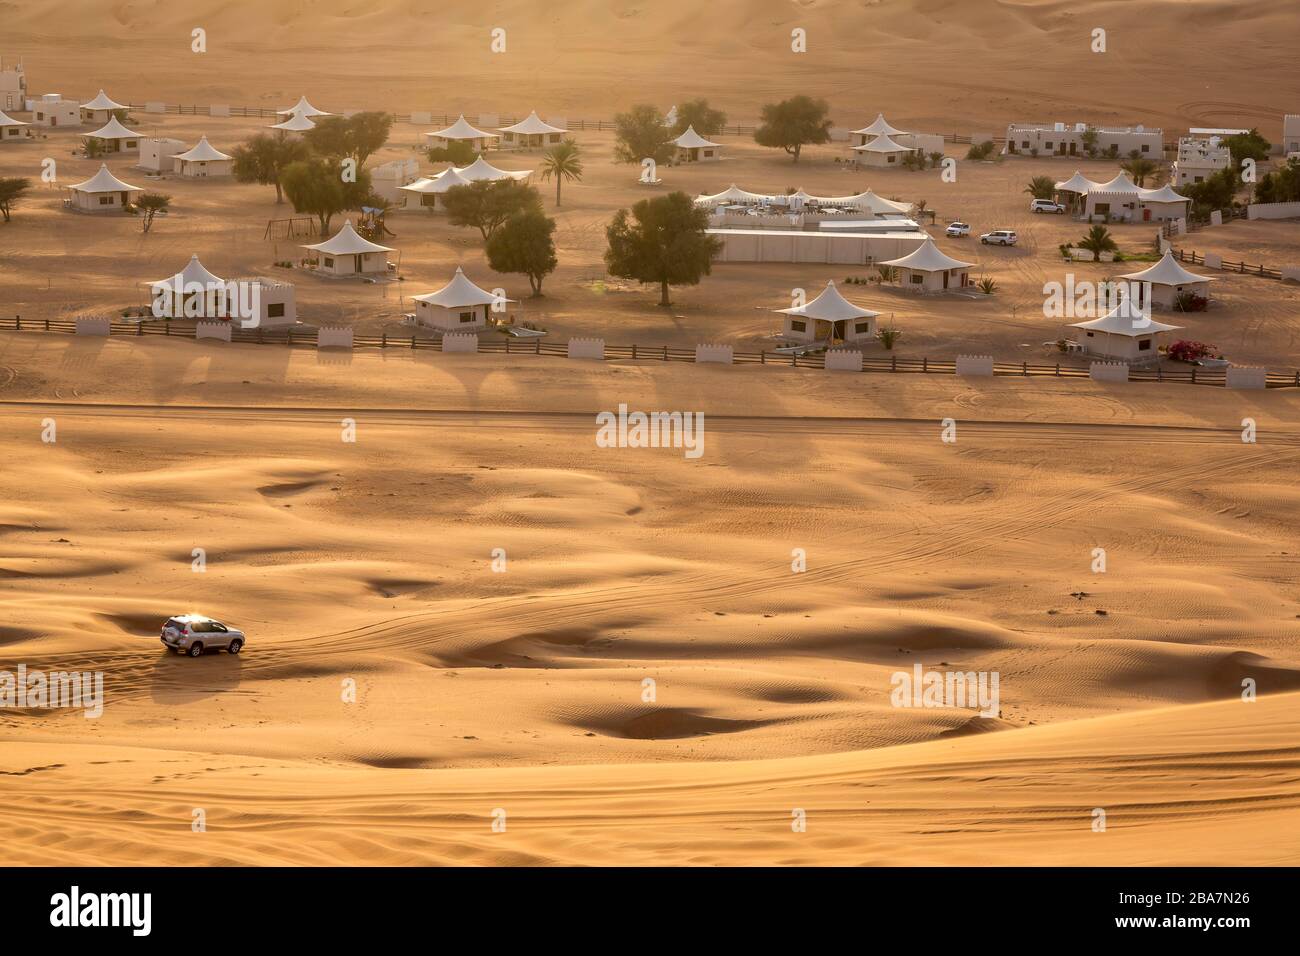 The Desert Nights Resort near the town of Shahiq in Oman, surrounded by the sand dunes of the Wahiba desert. Luxury camping style tourist resort. Stock Photo